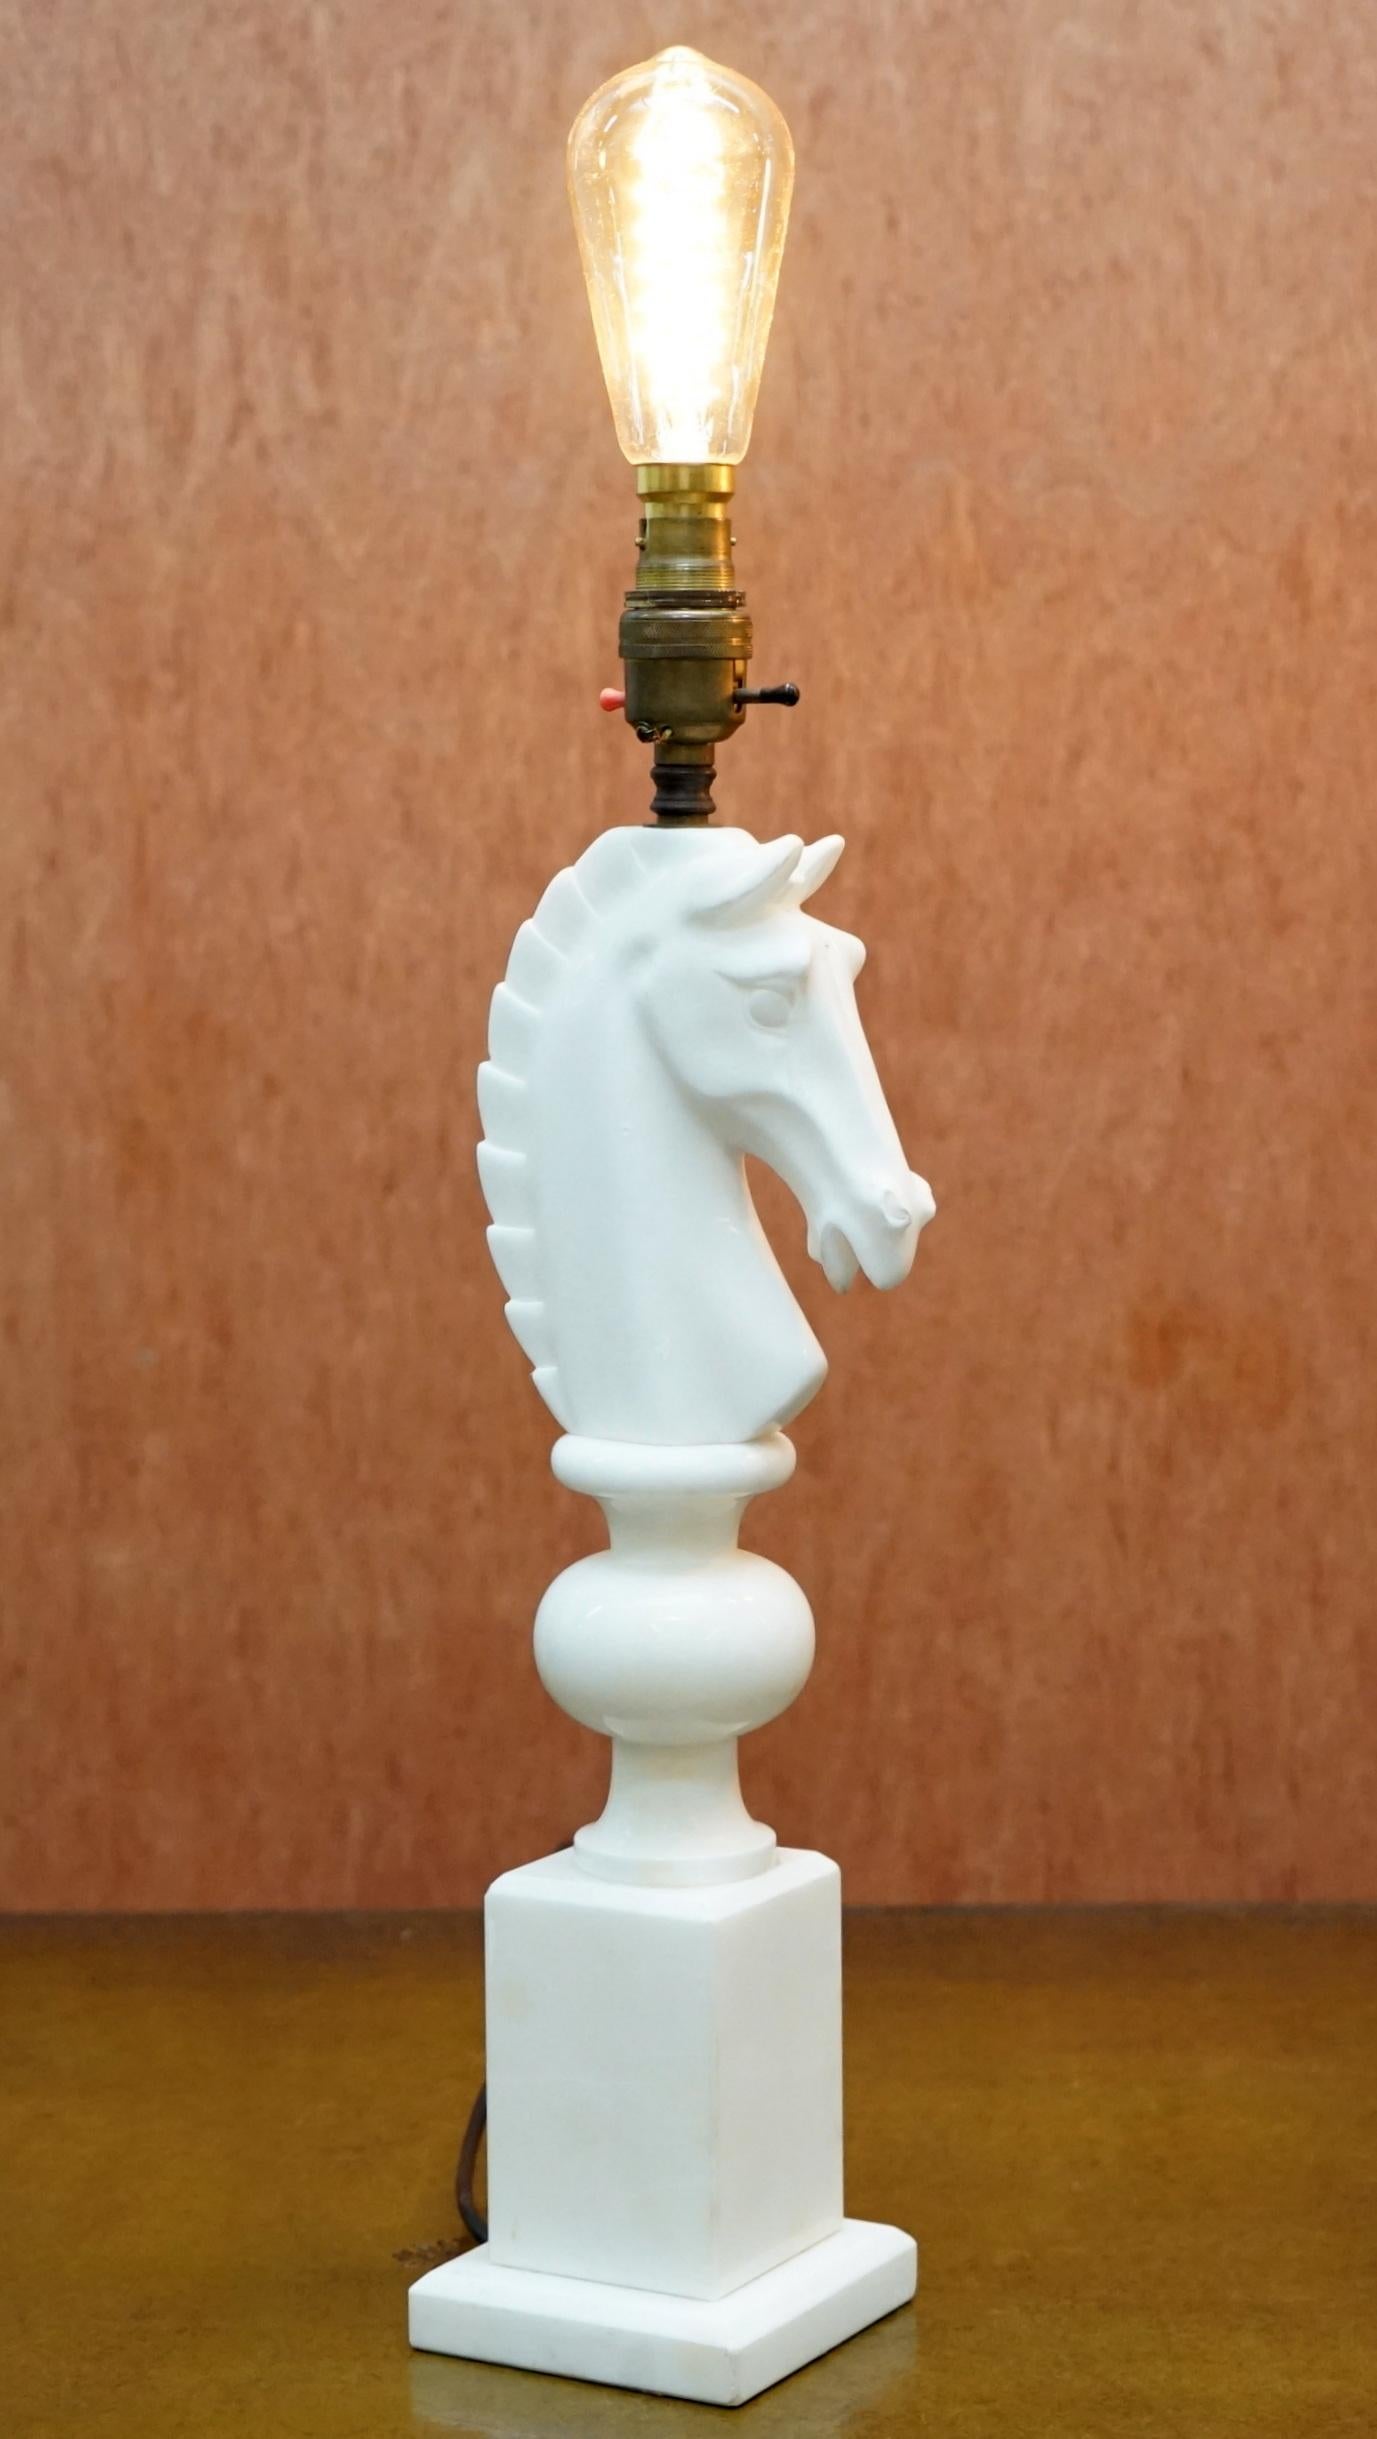 We are delighted to offer for sale this stunning pair of original Italian Carrara marble chess piece horse knight lamps

They are in absolutely stunning condition, fully serviced with new caballing throughout, they are ready to